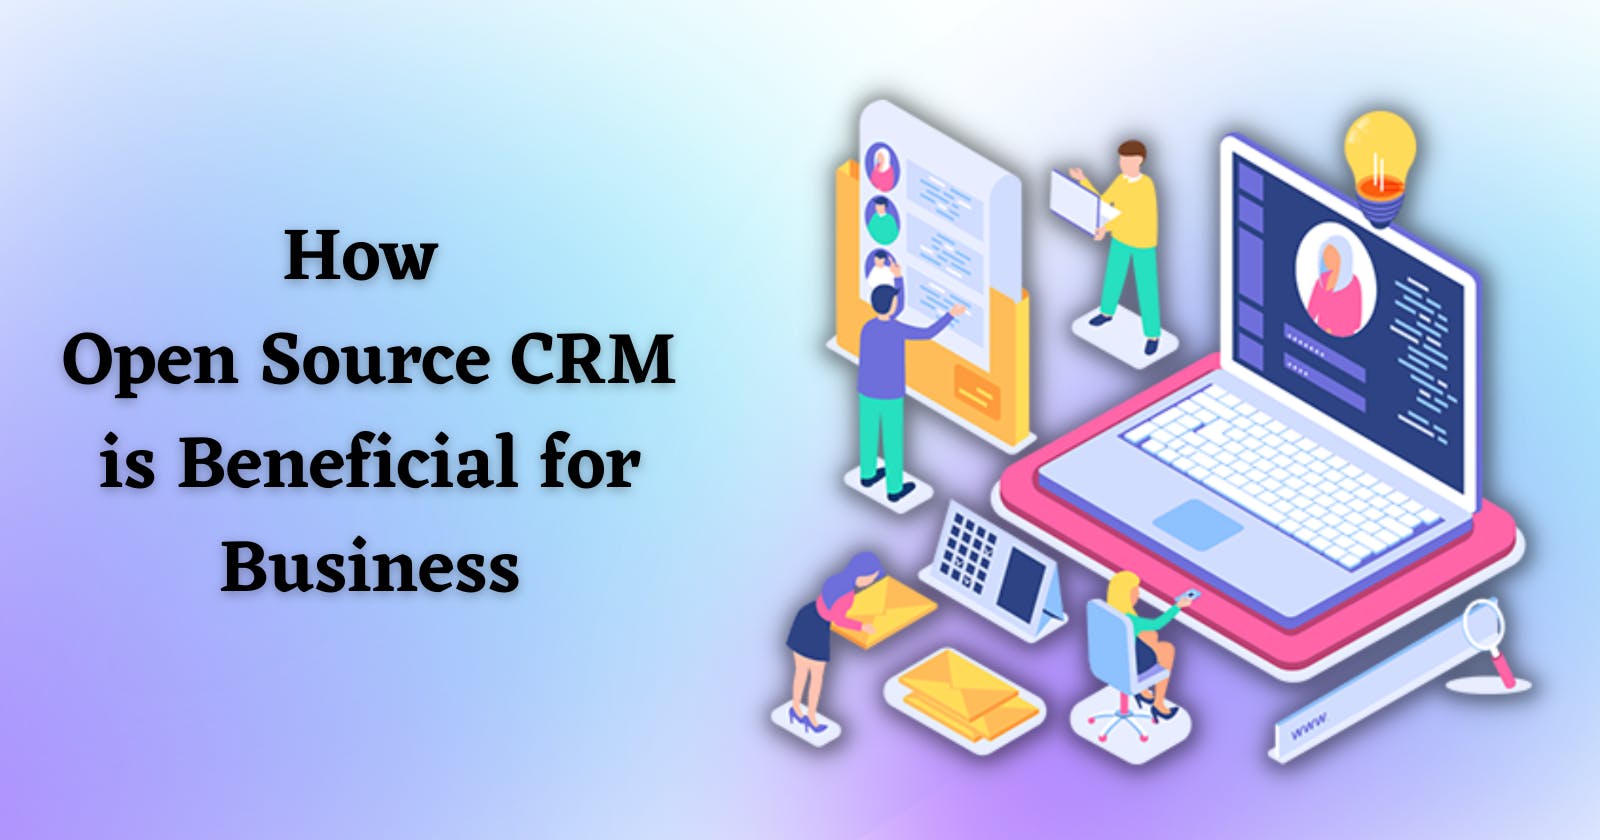 How Open Source CRM is Beneficial for Business